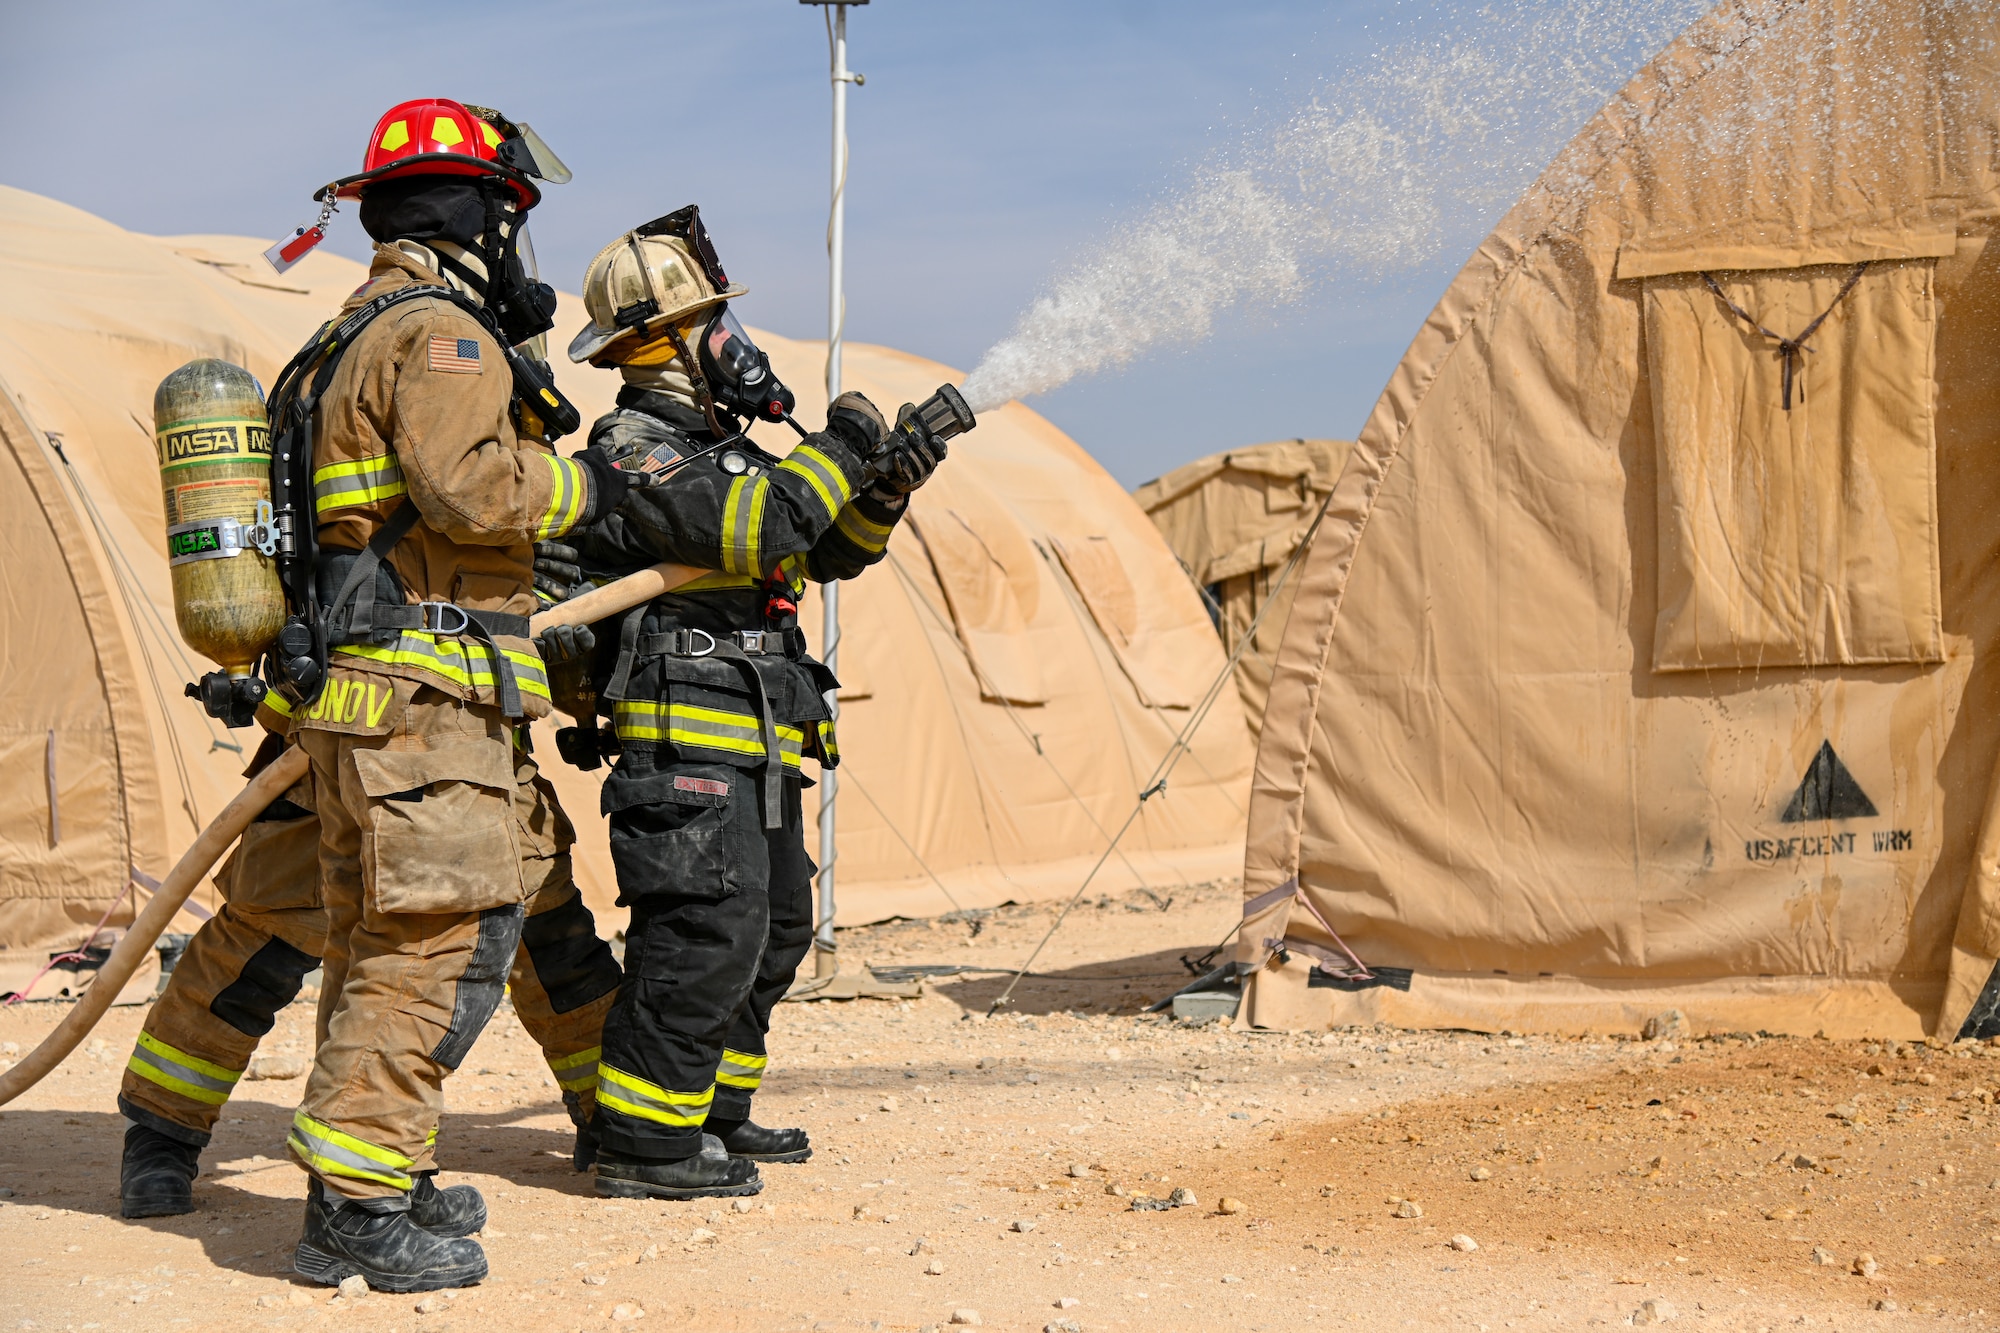 U.S. Air Force Staff Sgt. Sanjar Tursunov, left, 378th Expeditionary Civil Engineer Squadron firefighter, and Brig. Gen. Robert Davis, right, 378th Air Expeditionary Wing commander, extinguish a simulated structure fire at Prince Sultan Air Base, Kingdom of Saudi Arabia, Dec. 9, 2021. Airmen from the 378th ECES regularly participate in contingency readiness development to ensure that they are always prepared to answer the call. (U.S. Air Force photo by Staff Sgt. Christina Graves)